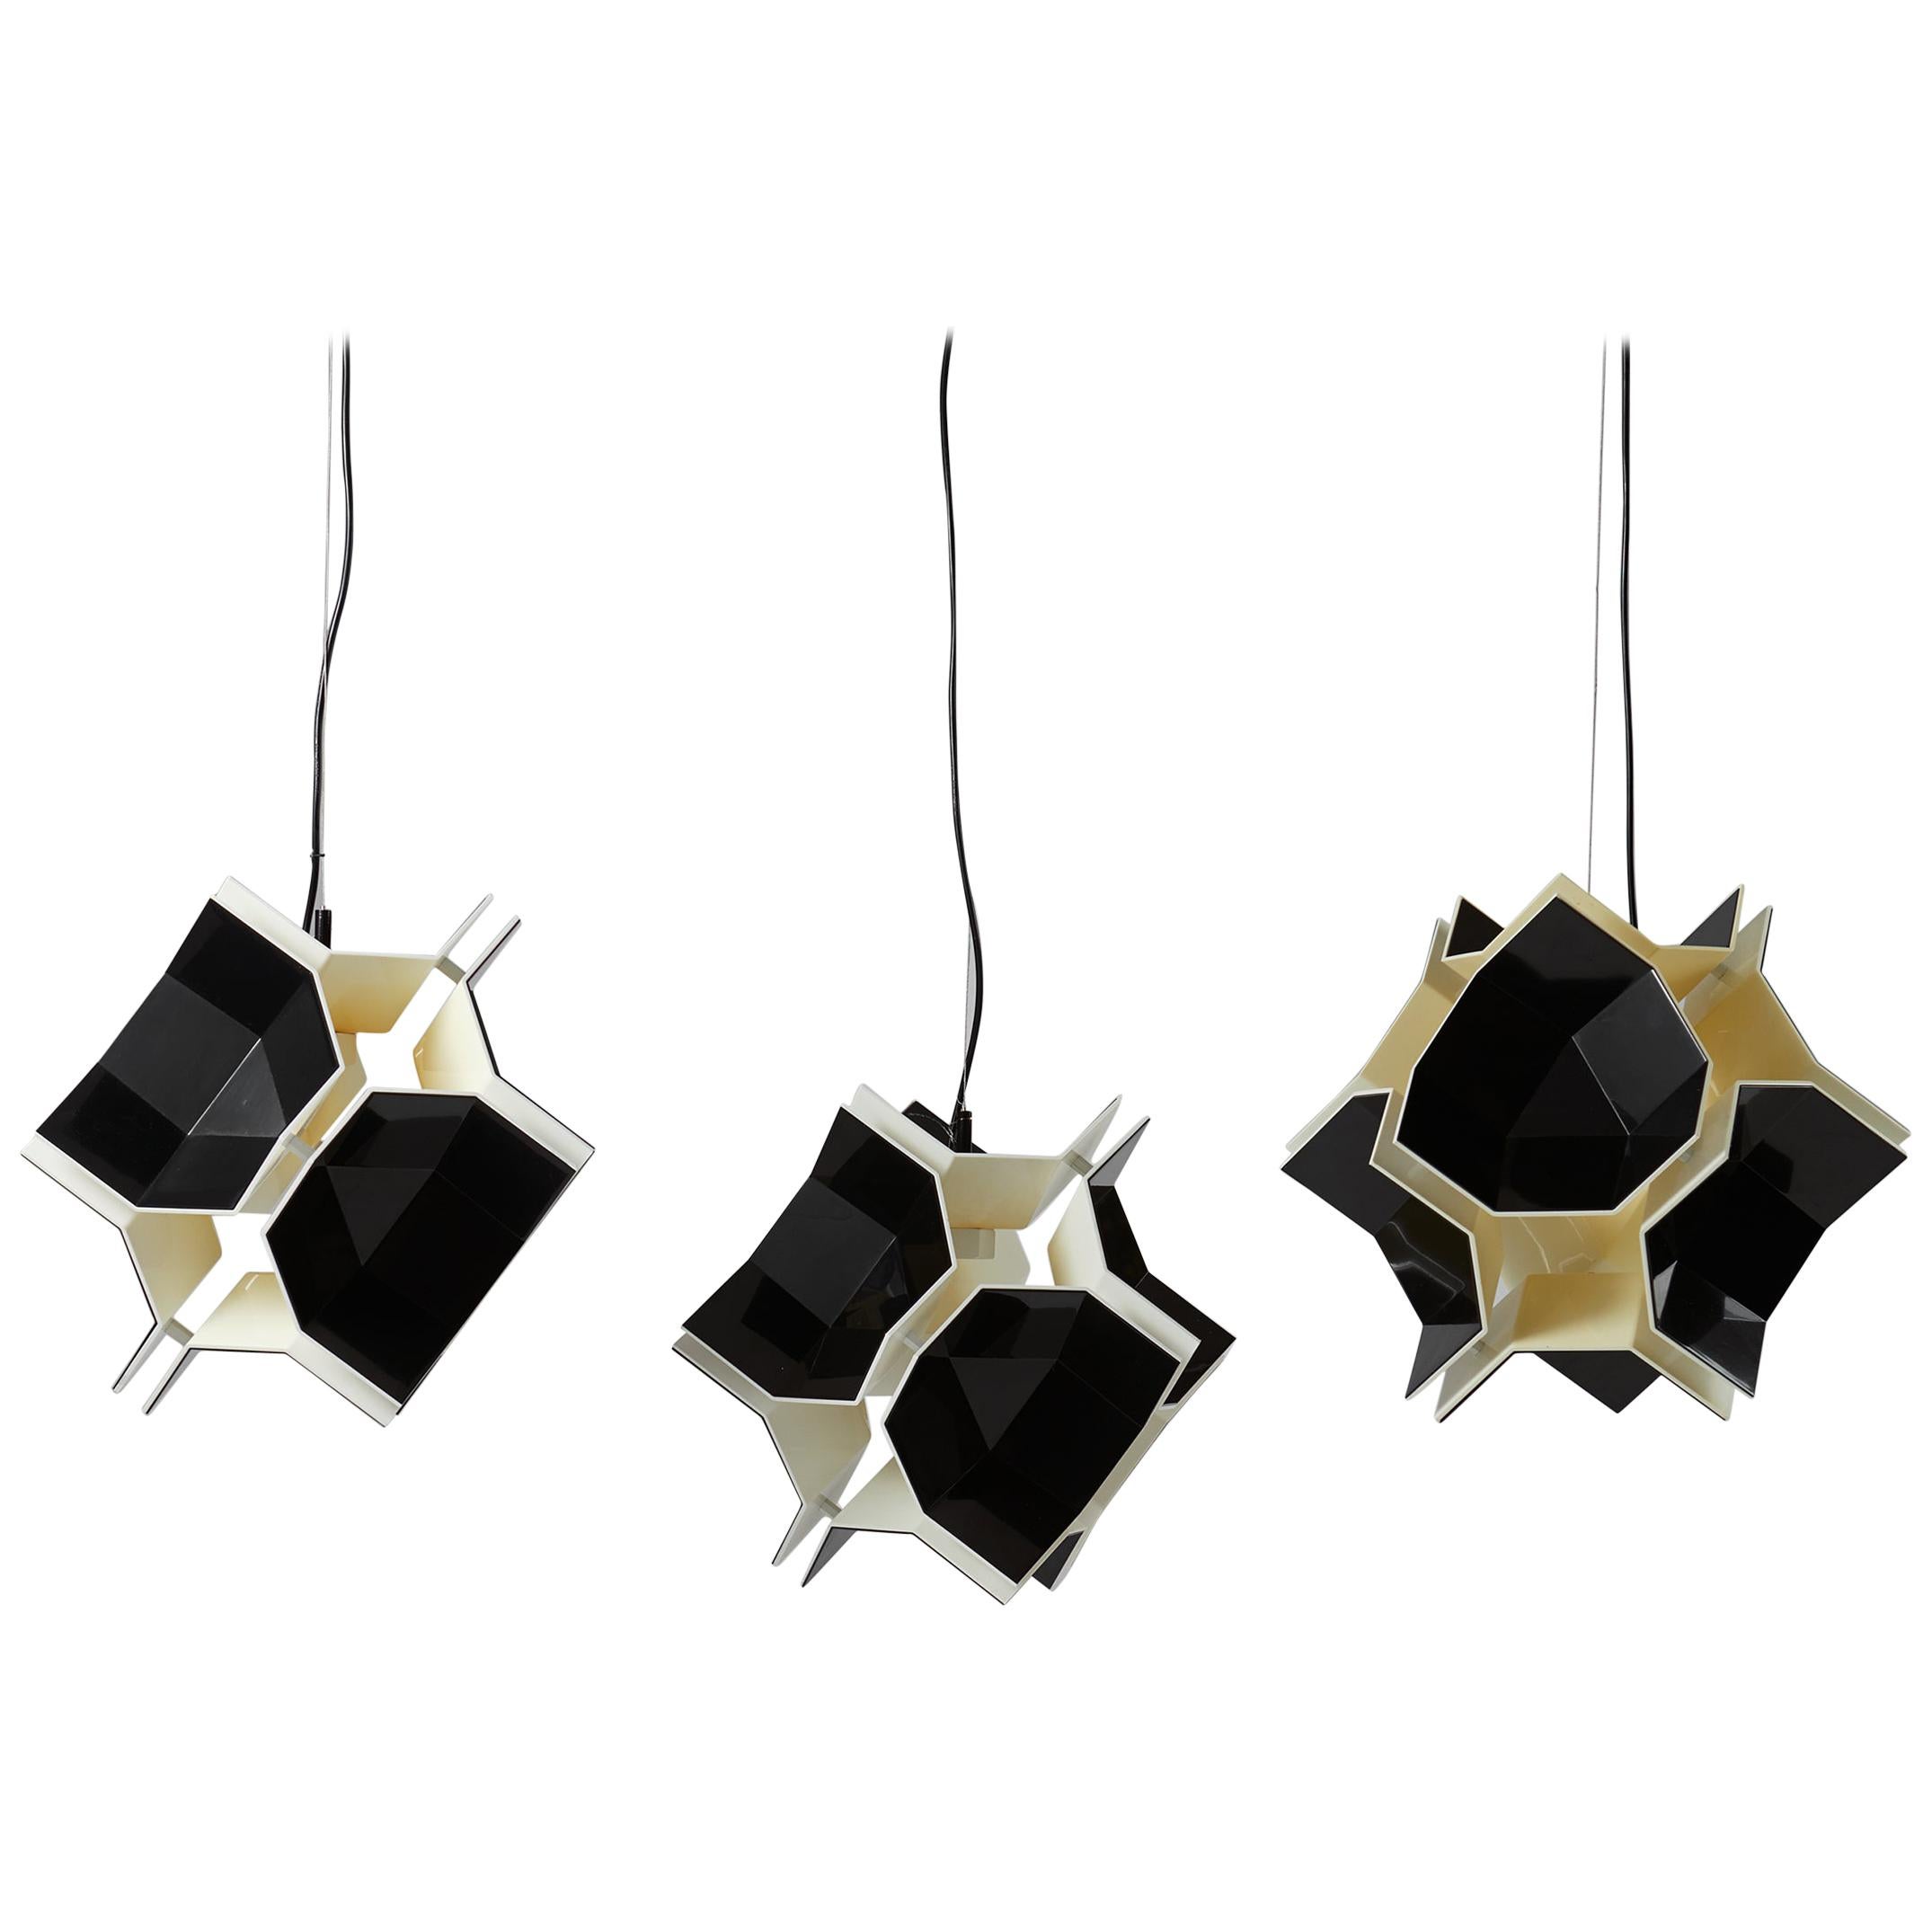 Set of Three T&T Ceiling Lamps Designed by Christophe de Ryck for Dark